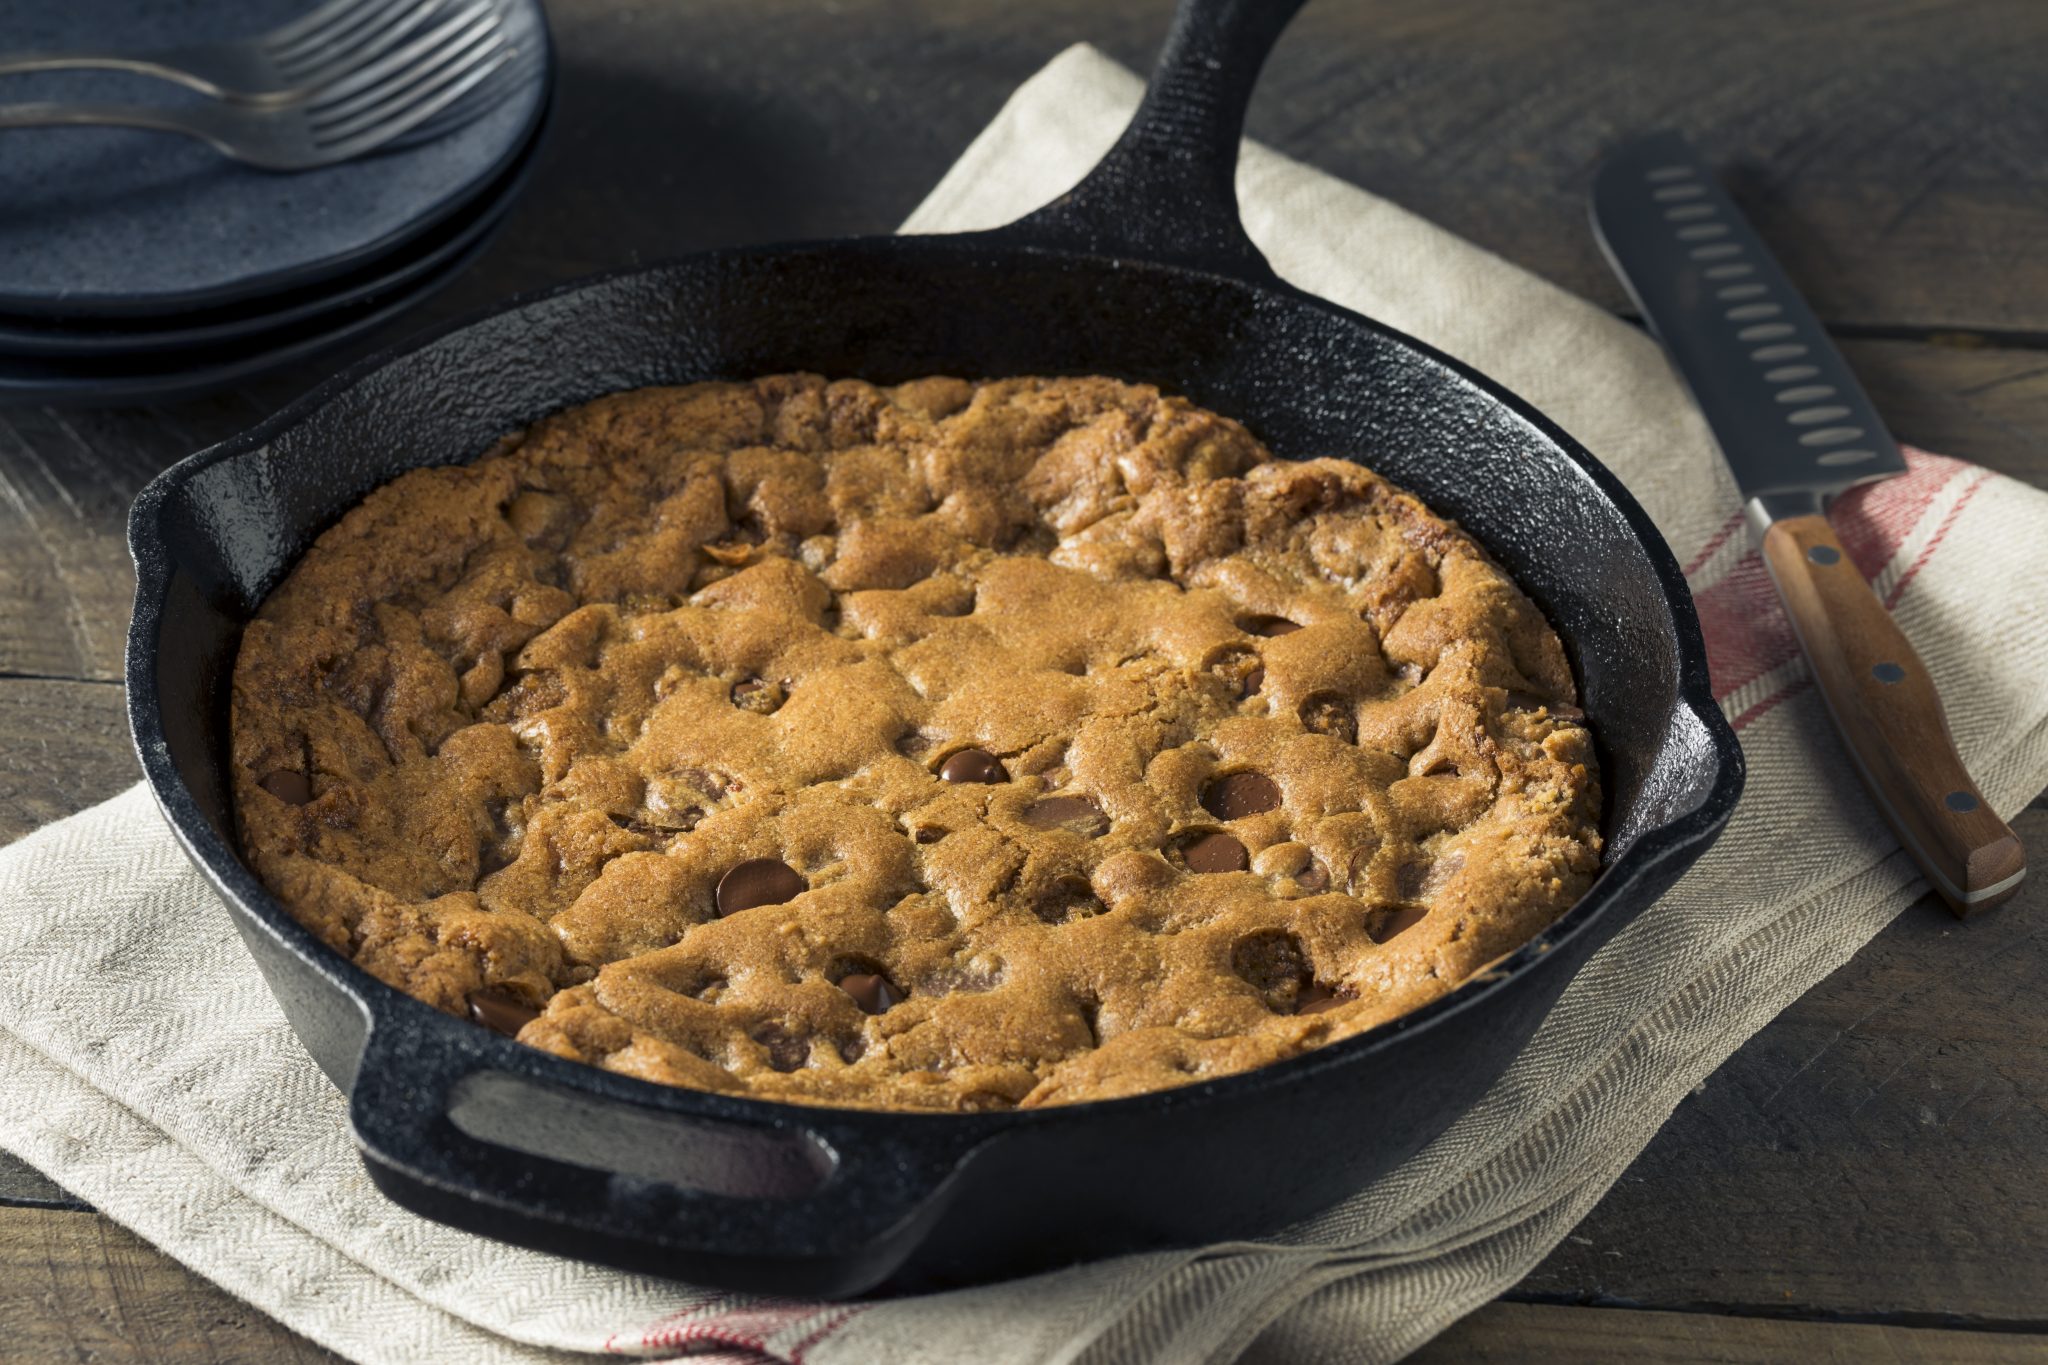 Food Gift Series – Cast Iron Skillet Chocolate Chip Cookie Kit